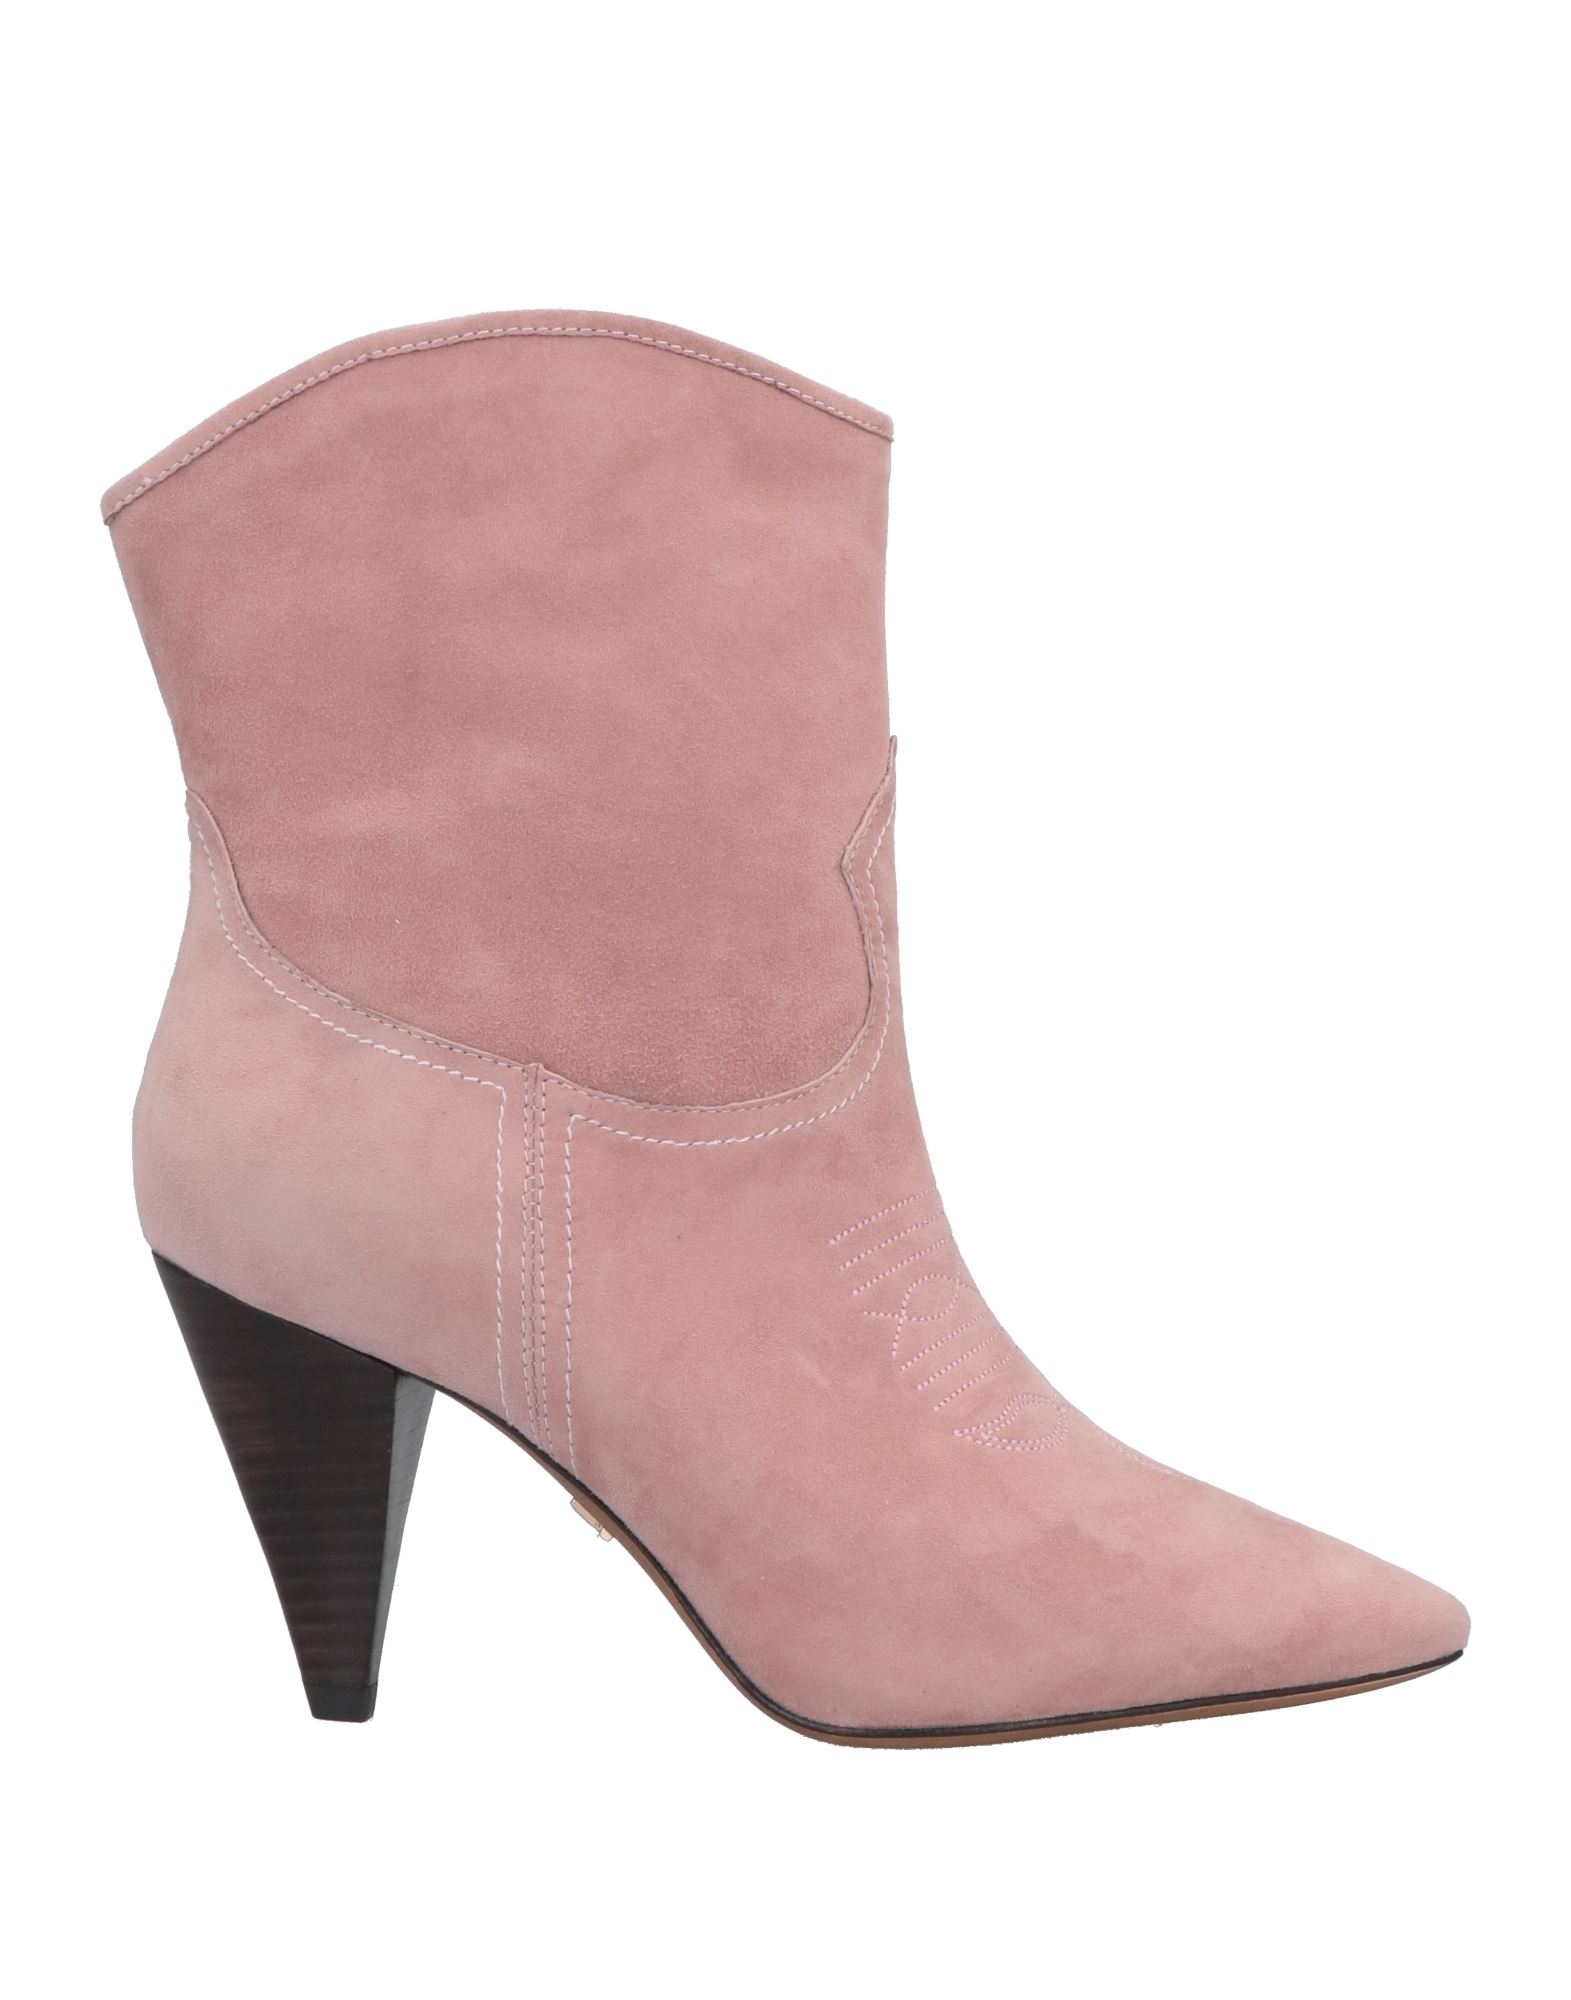 Lola Cruz Ankle Boots In Pink